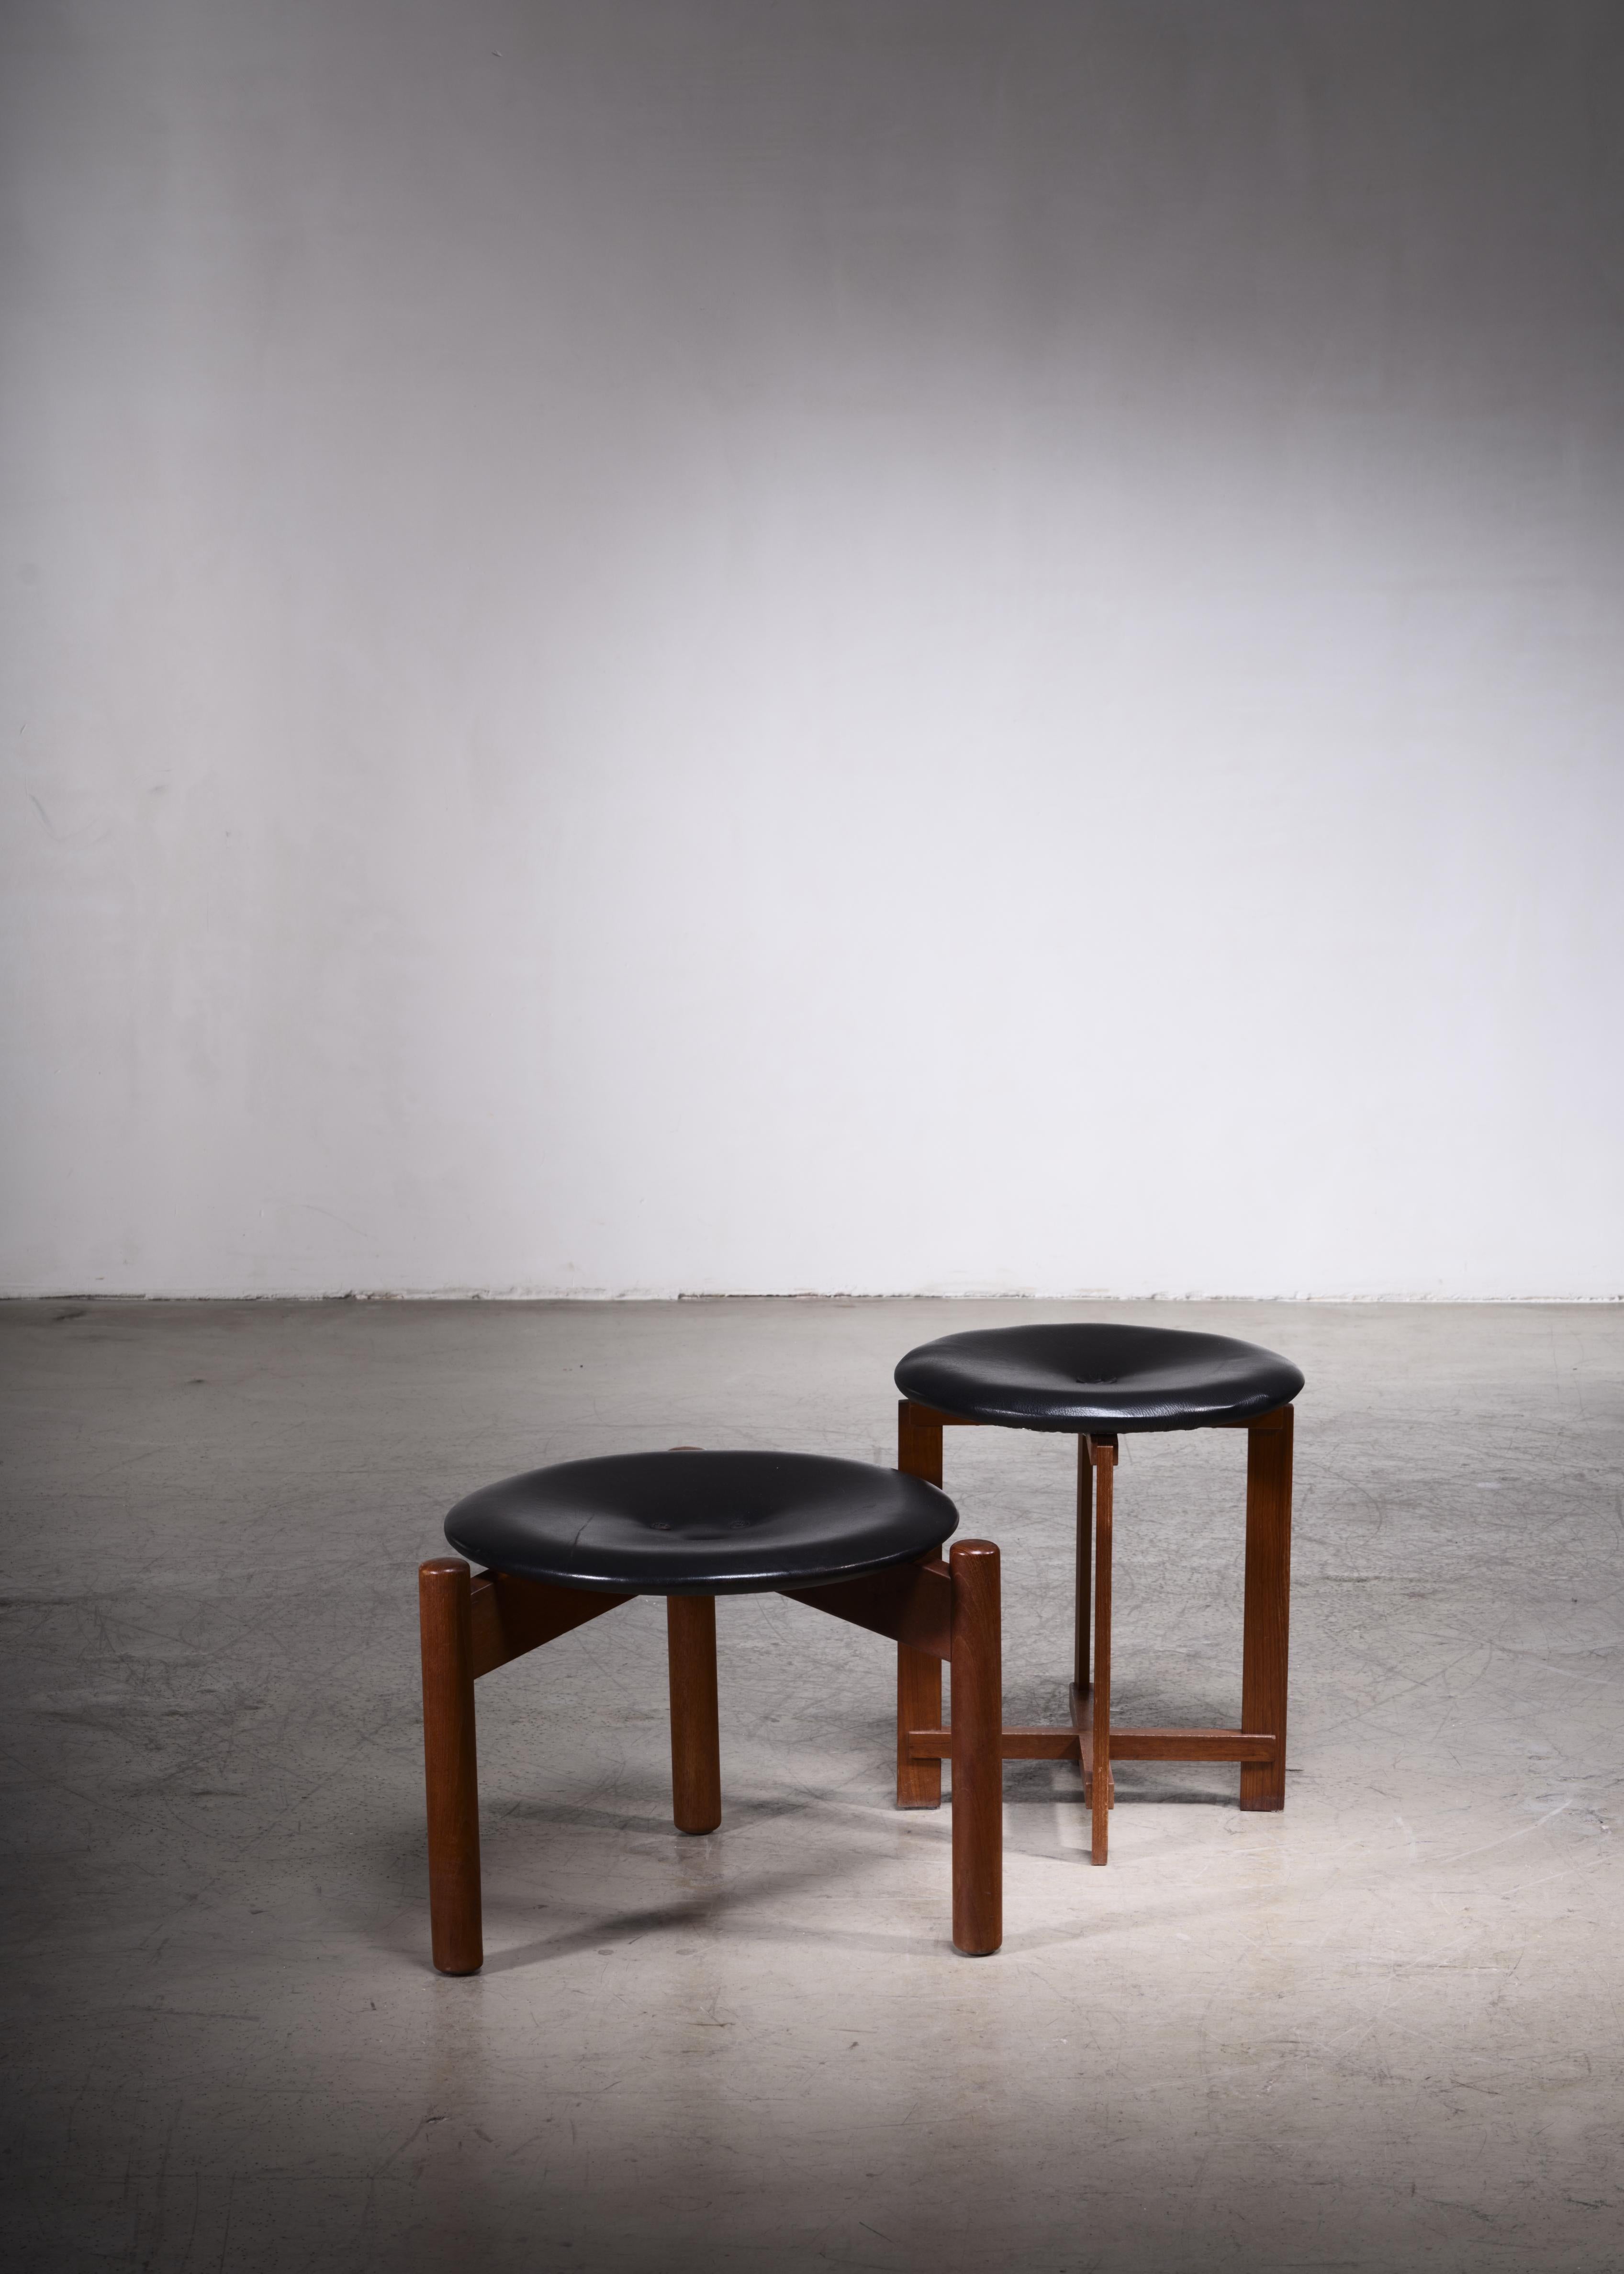 A pair of a high and low Östen and Uno Kristiansson stools for Luxus, Vittsjö, Sweden. The lower stool, model '206' was designed in 1962.
The stools are made of a teak frame, one tripod and one four-legged, with a black leather seatpad.

The